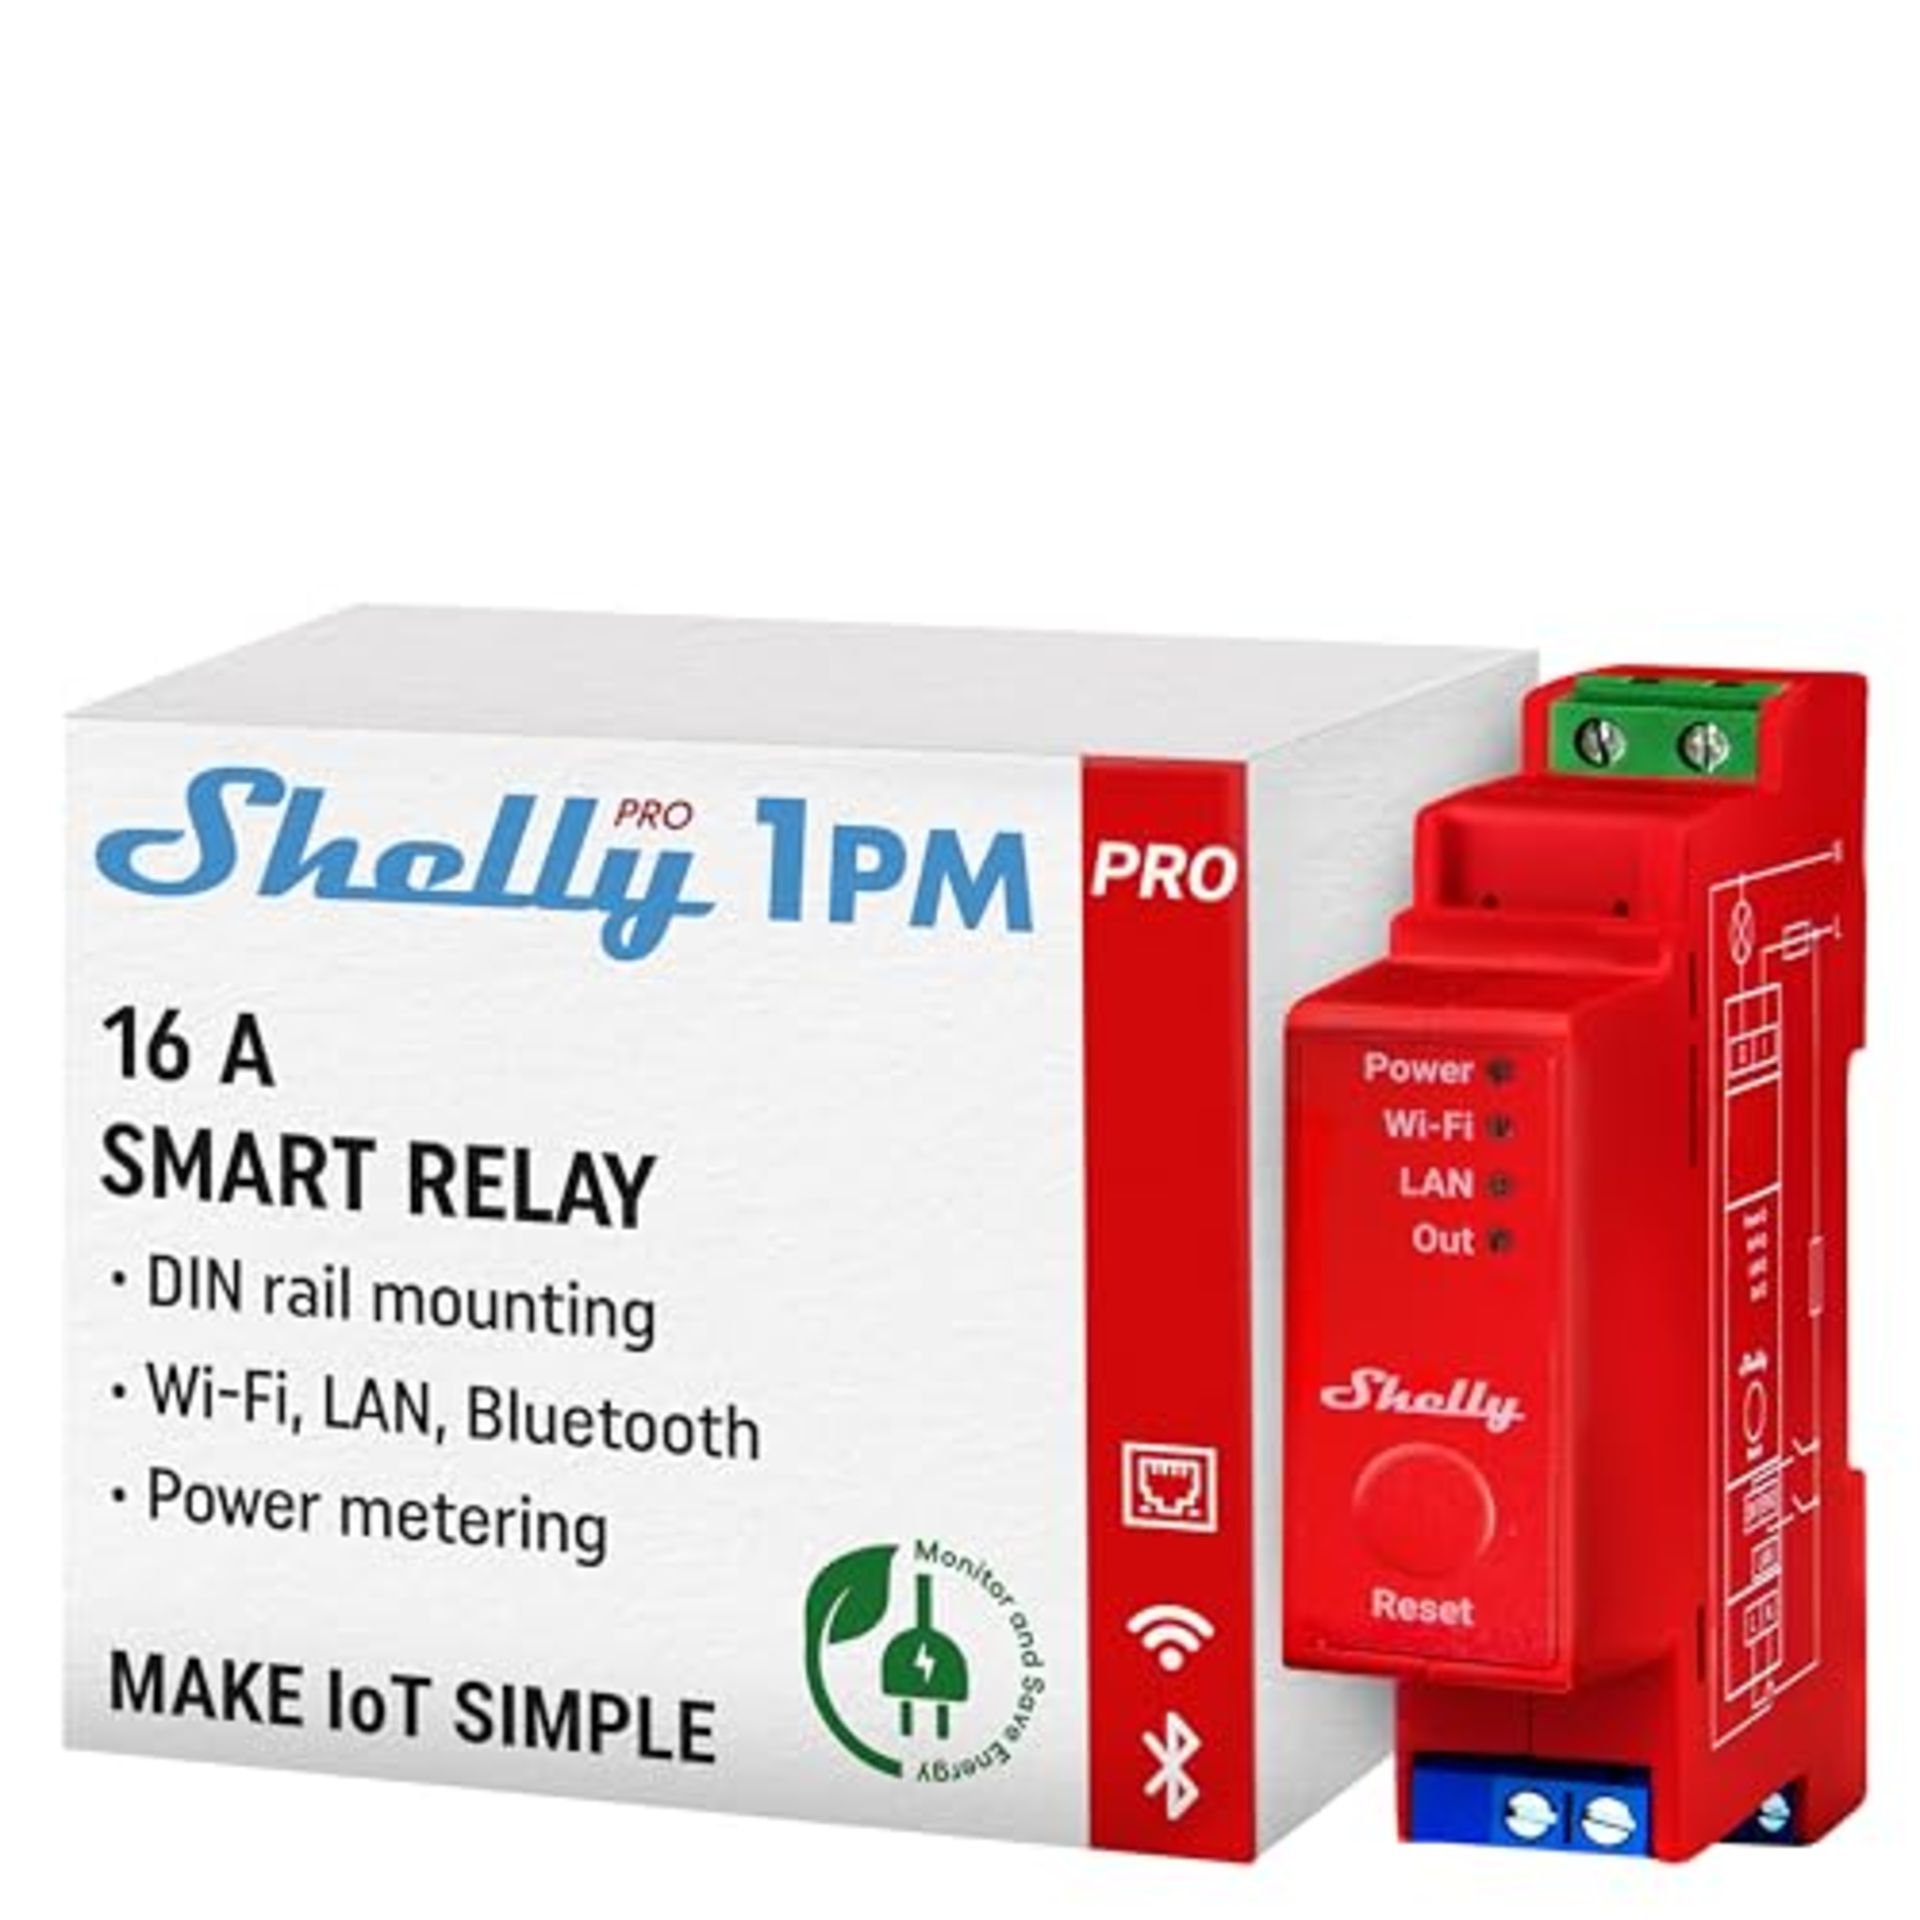 RRP £72.00 Shelly Plus 1PM WiFi & Bluetooth Smart Relay Switch with Power Measurement Home Automa